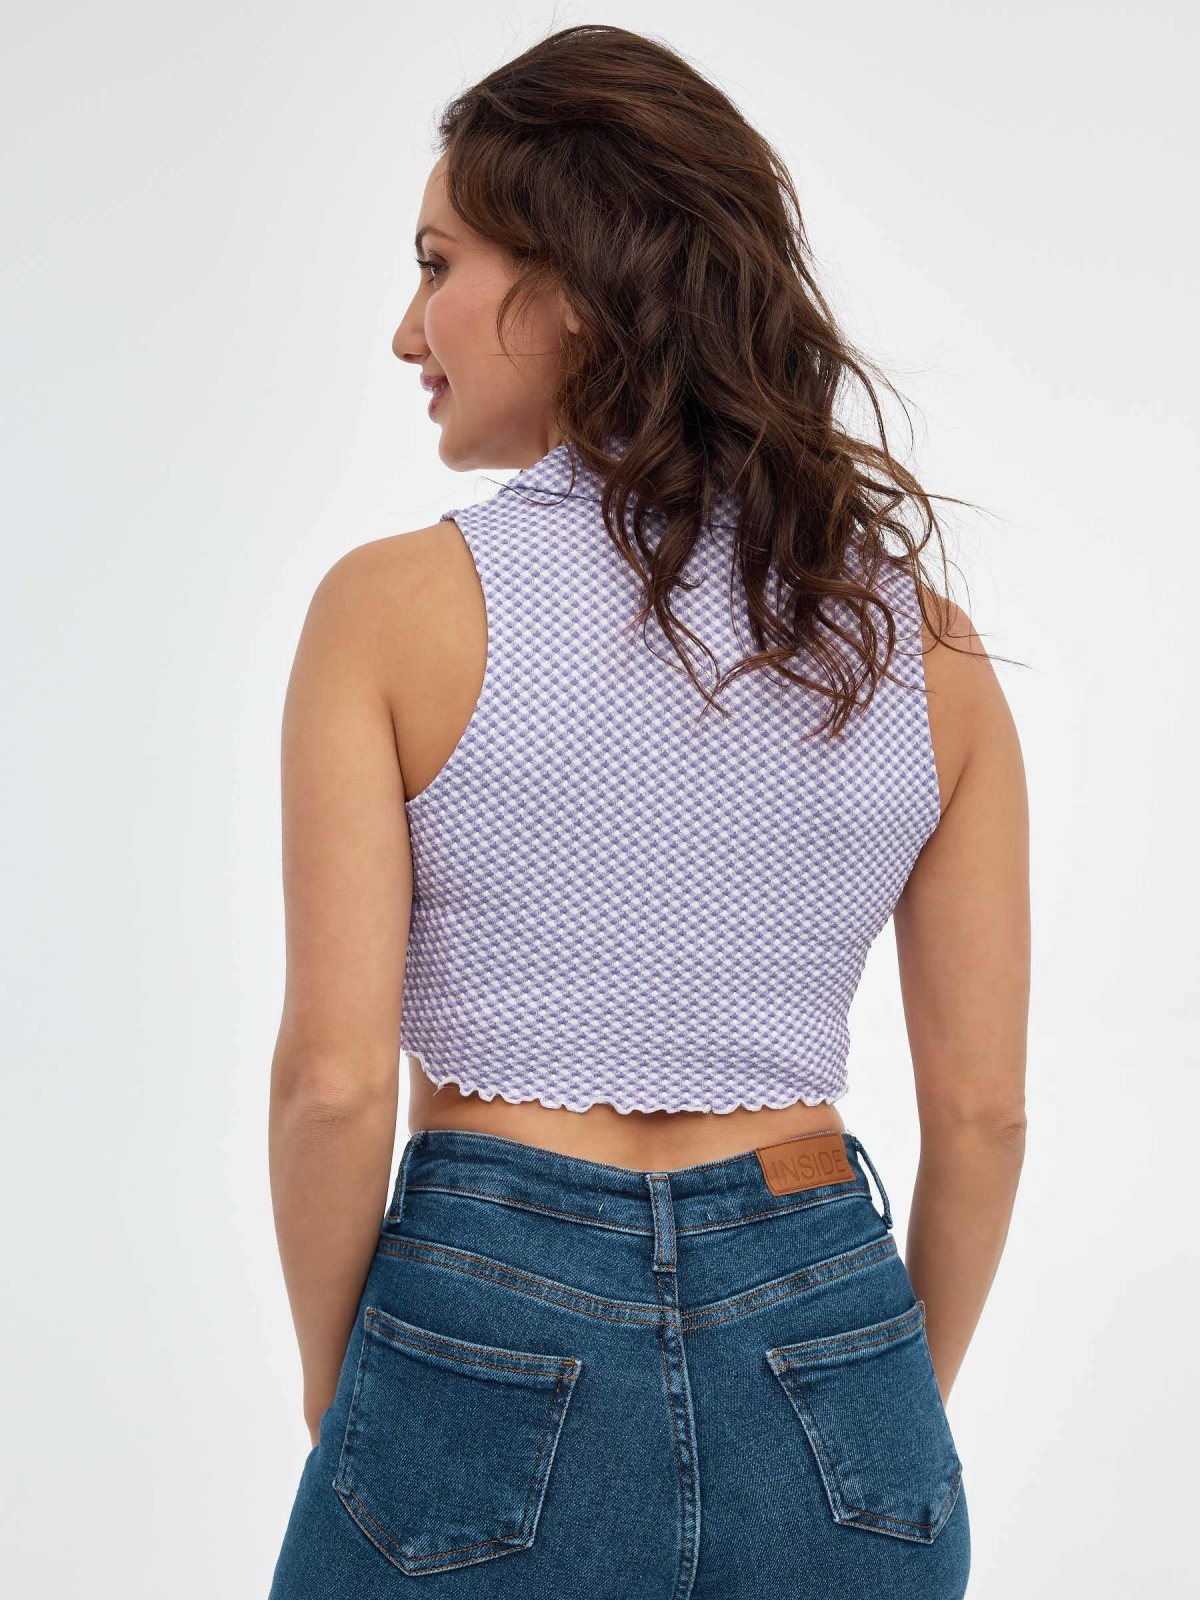 Sleeveless crop top mauve middle back view